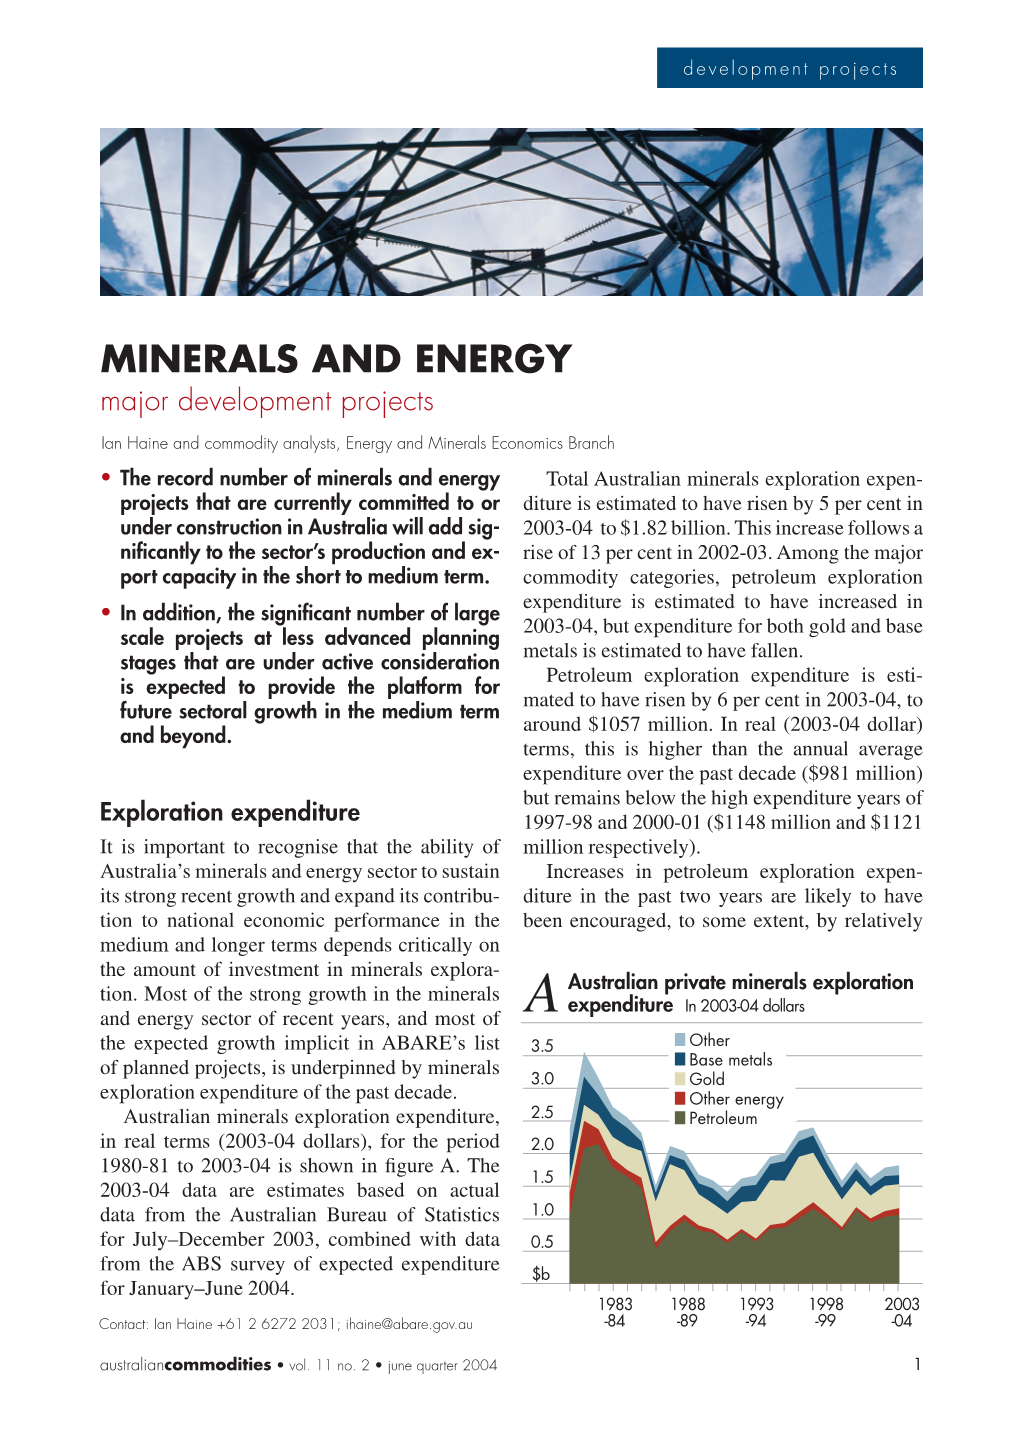 MINERALS and ENERGY Major Development Projects